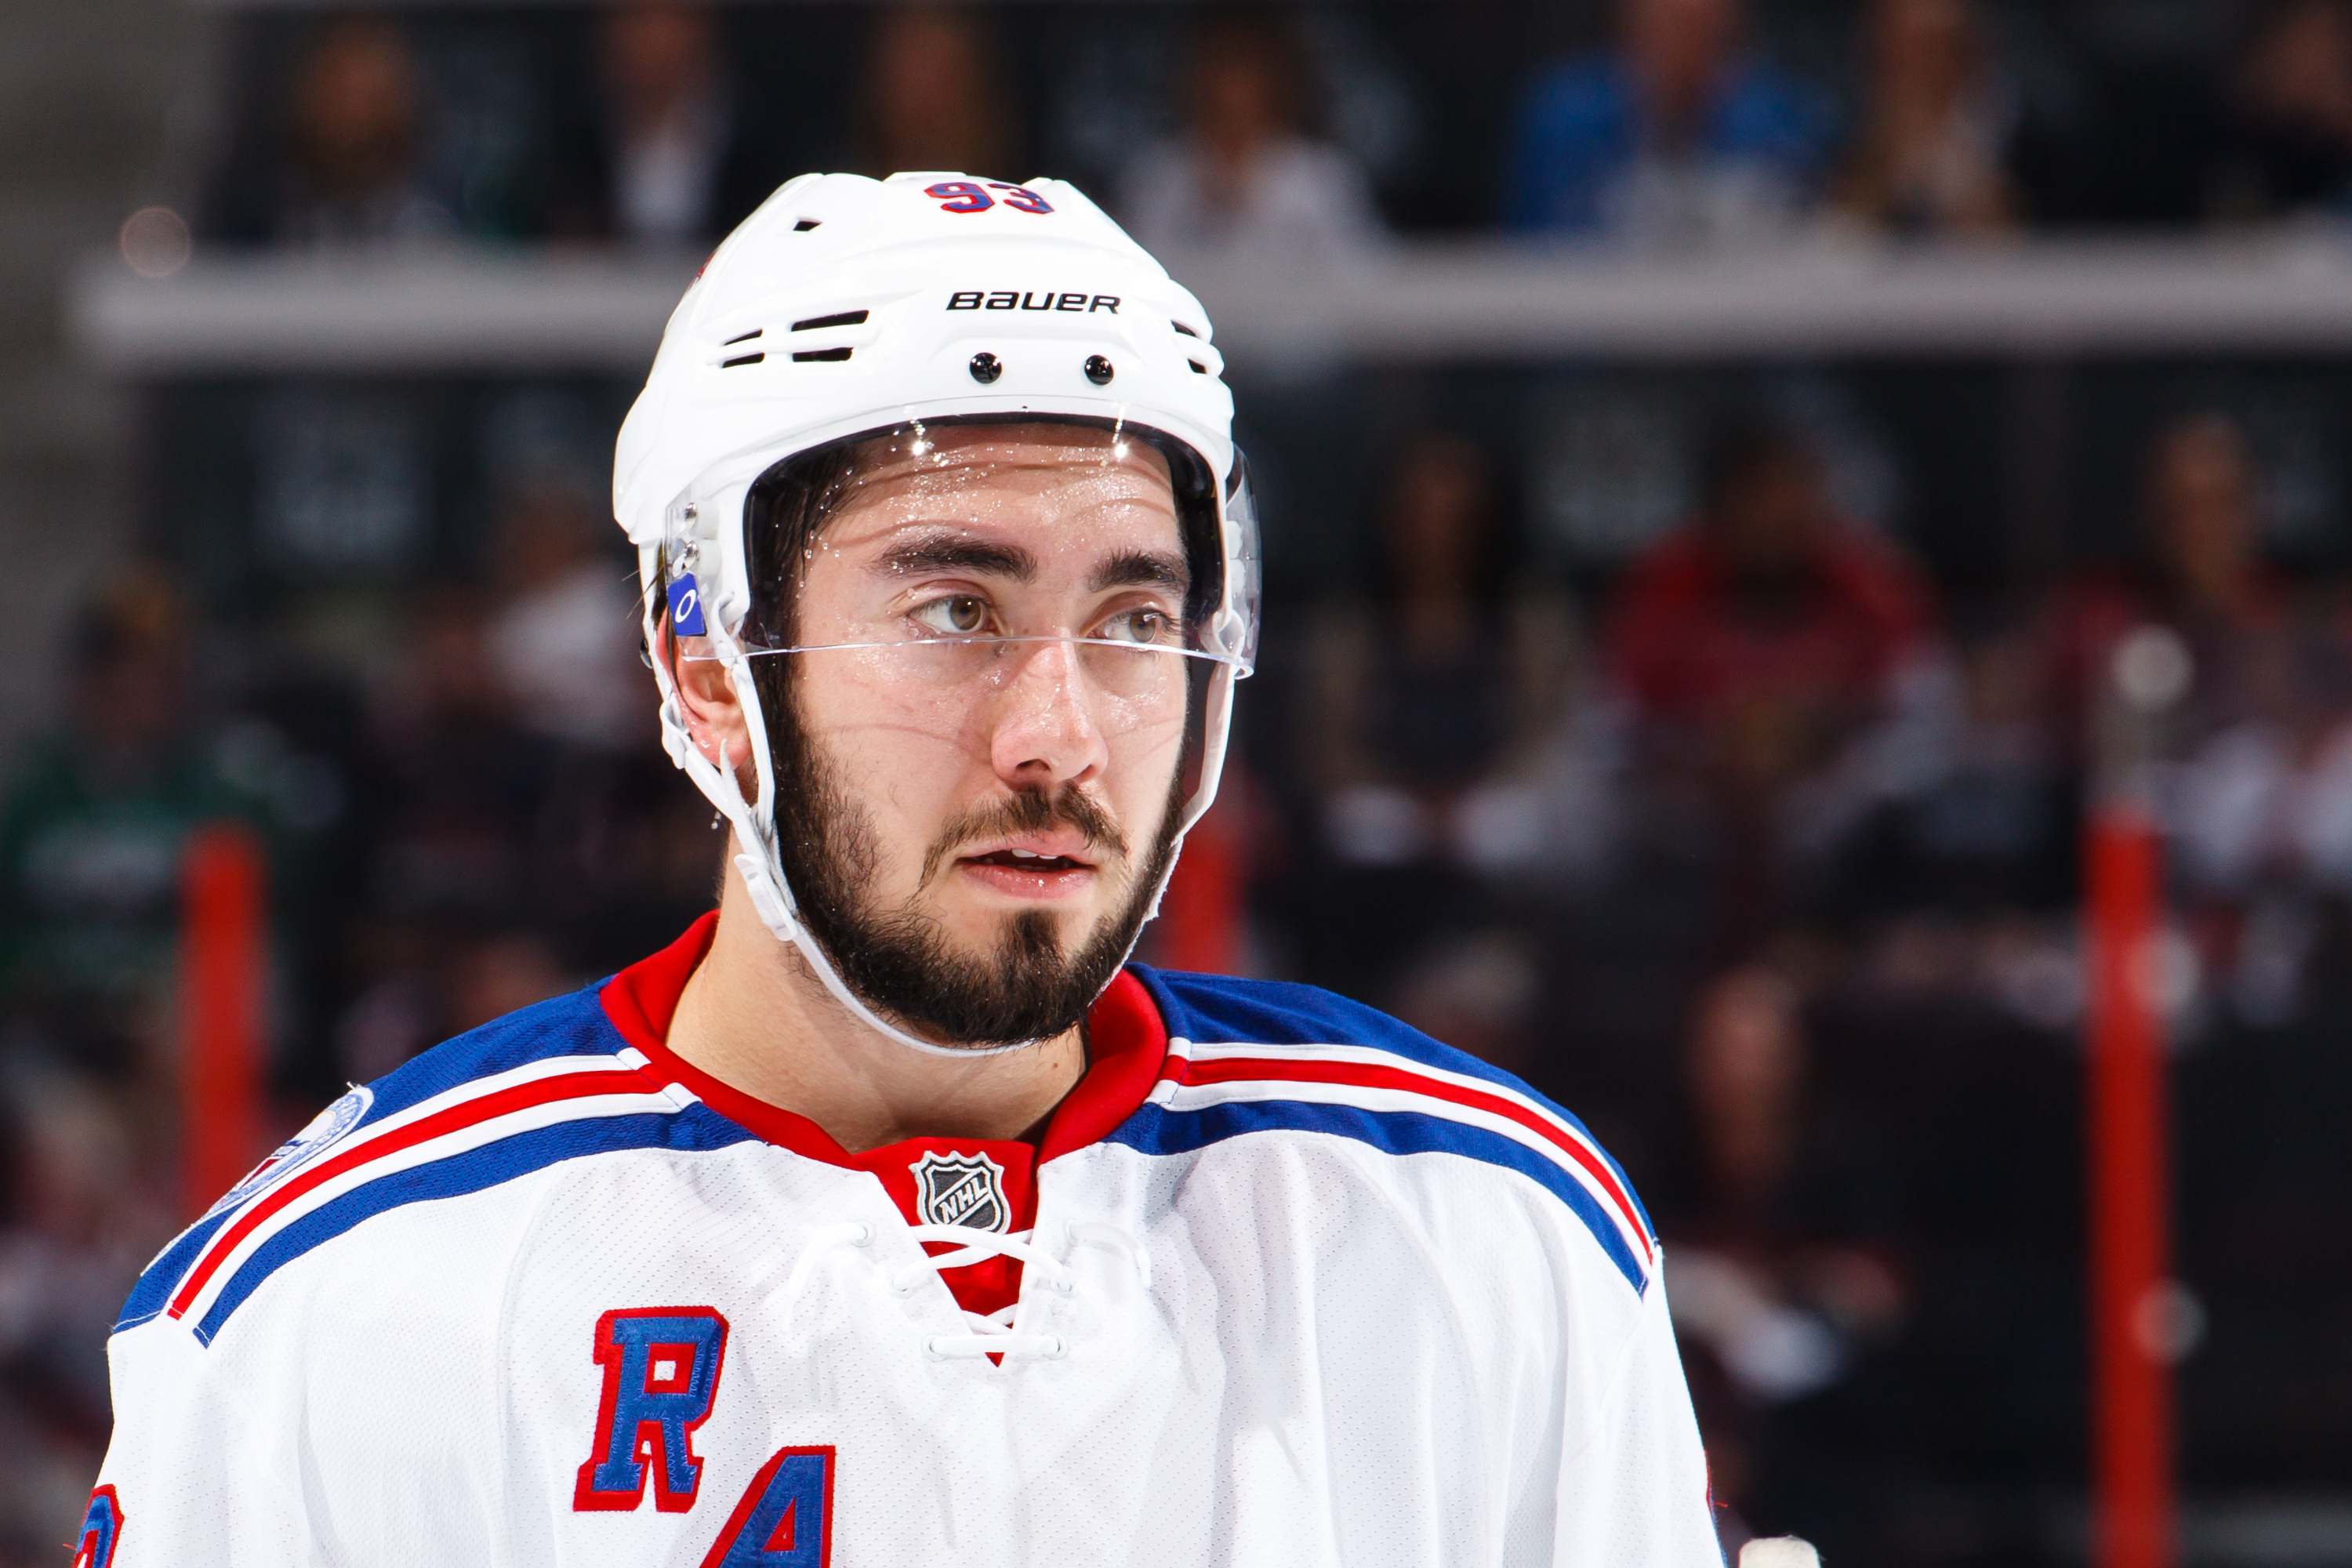 Rangers' Mika Zibanejad Presser Interrupted by Call for Mop